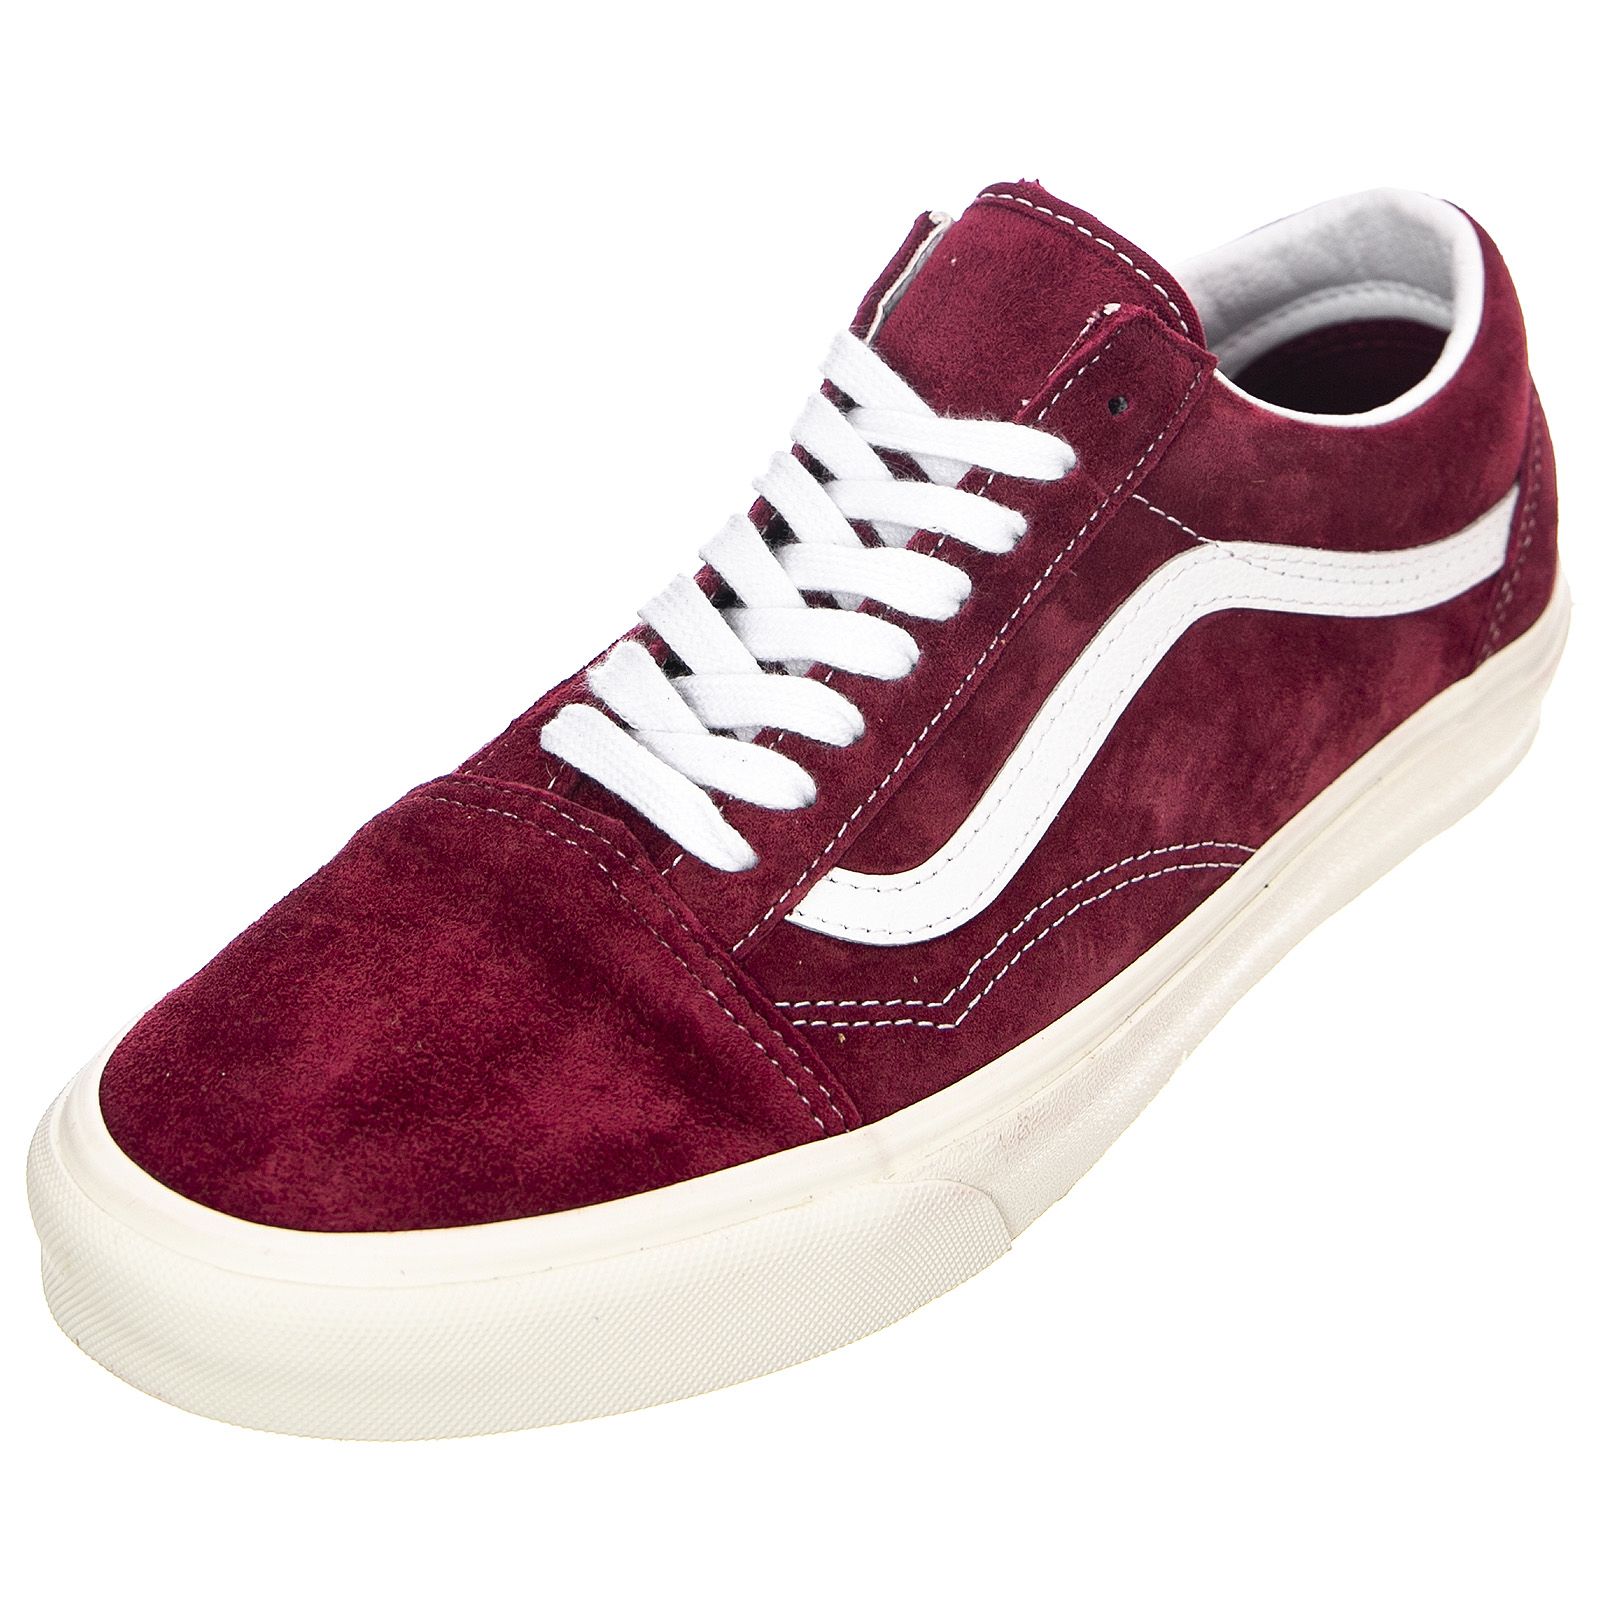 | UA Pig Vans Pomegranate Lace-Up White Old Snow Sh on Skool / Suede Law-Profile Buy